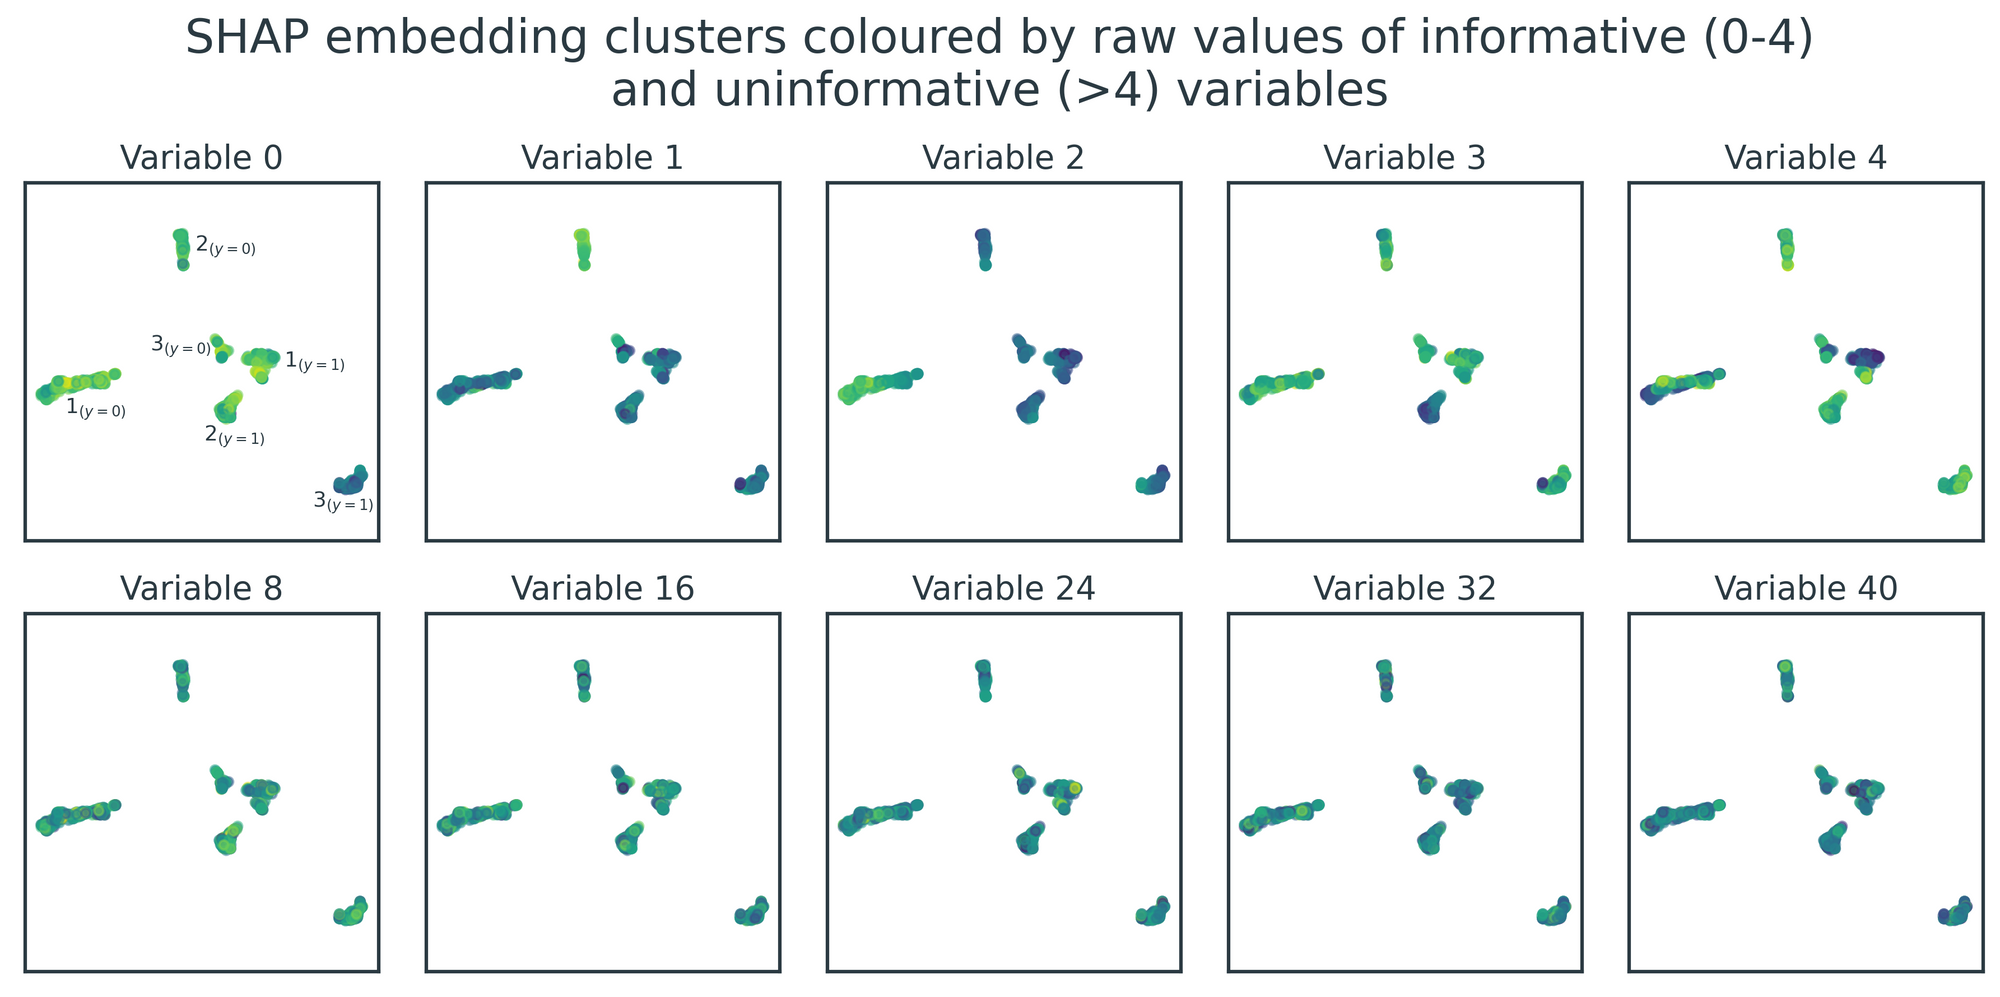 Supervised Clustering: How to Use SHAP Values for Better Cluster Analysis